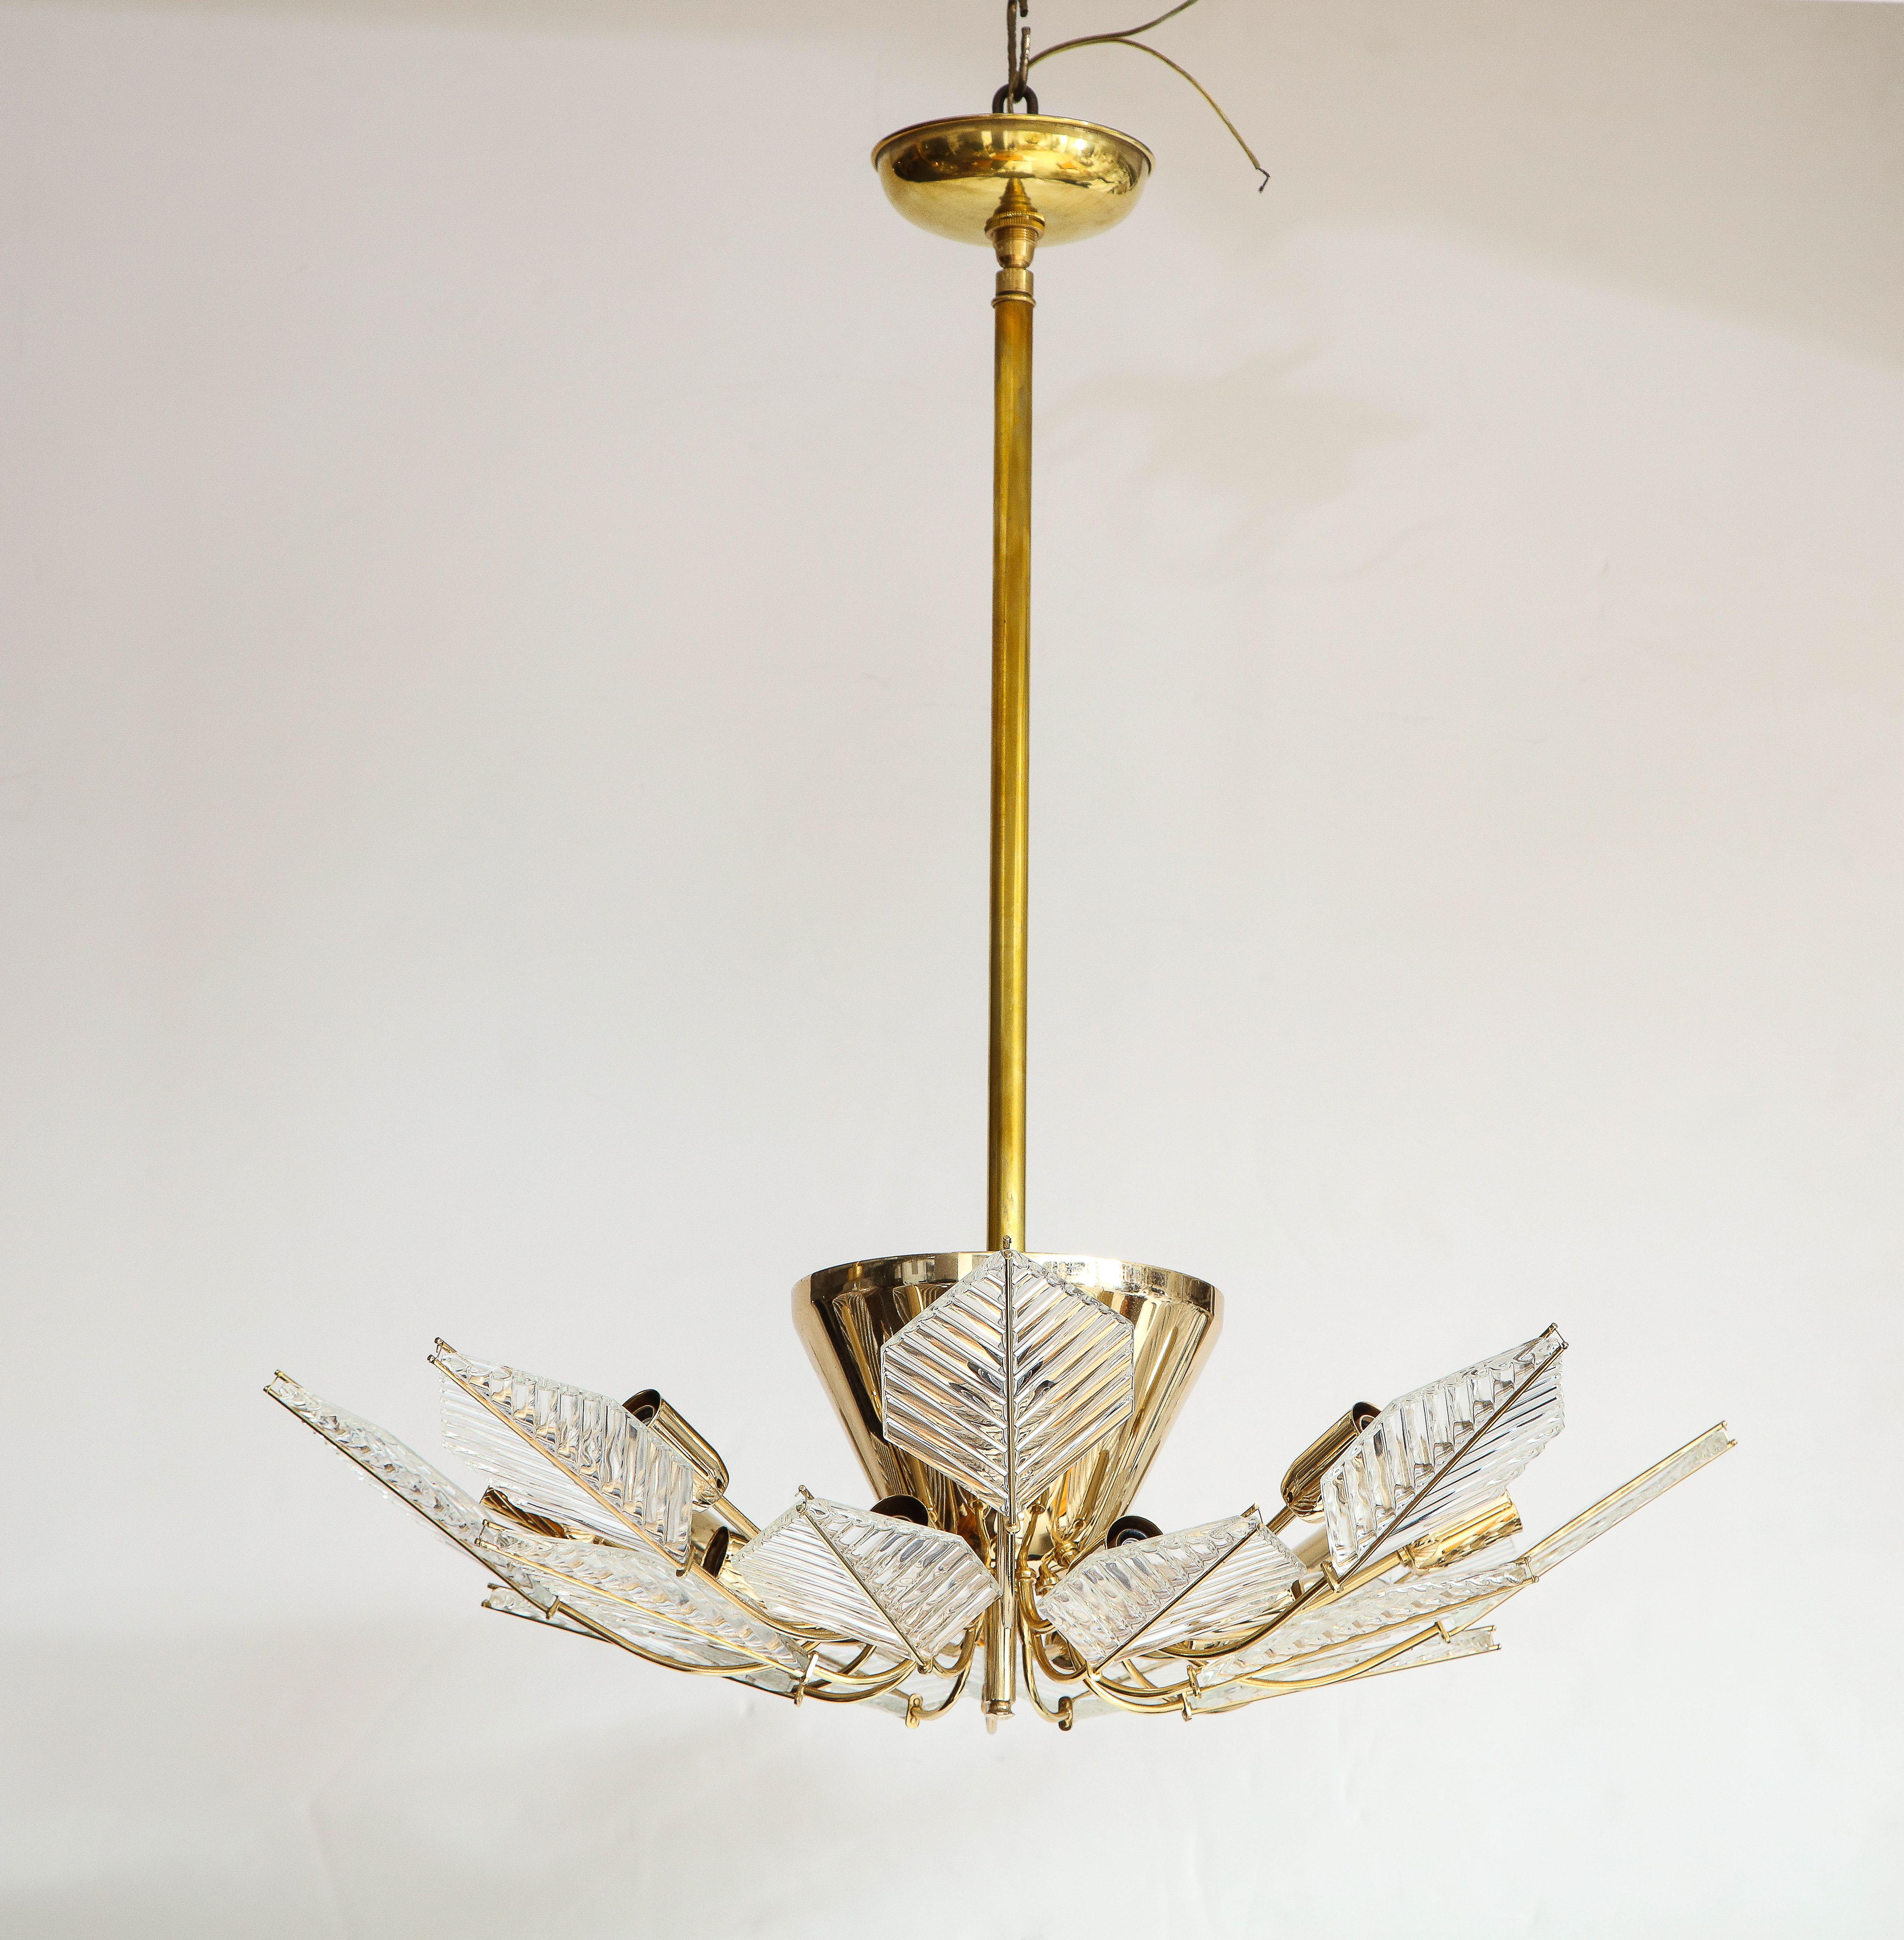 An Italian vintage chandelier with 15 lights, the gold plated stem and central support attach to the 15 arms decorated with cut glass leaf pattern design which support the lights underneath and for which provide a beautiful warm glow. An elegant and